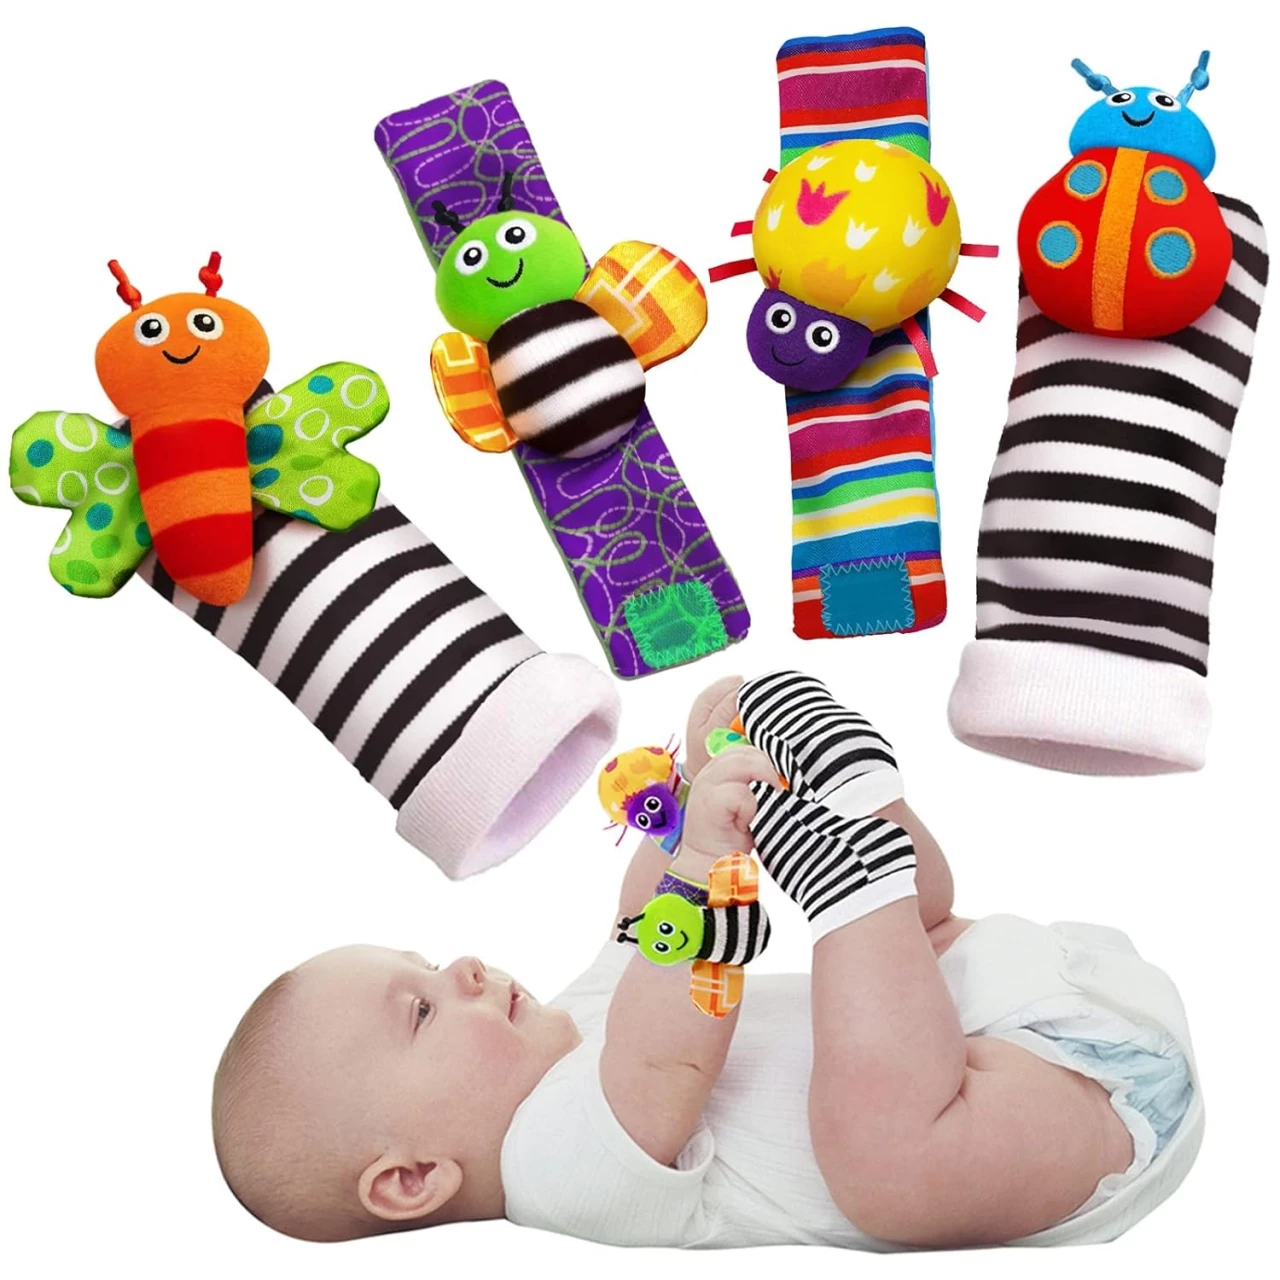 Baby Infant Rattle Socks Toys, Wrist Rattles and Foot Finders for Baby Boy or Girl - New Baby Gift Infant Toys 4PCS